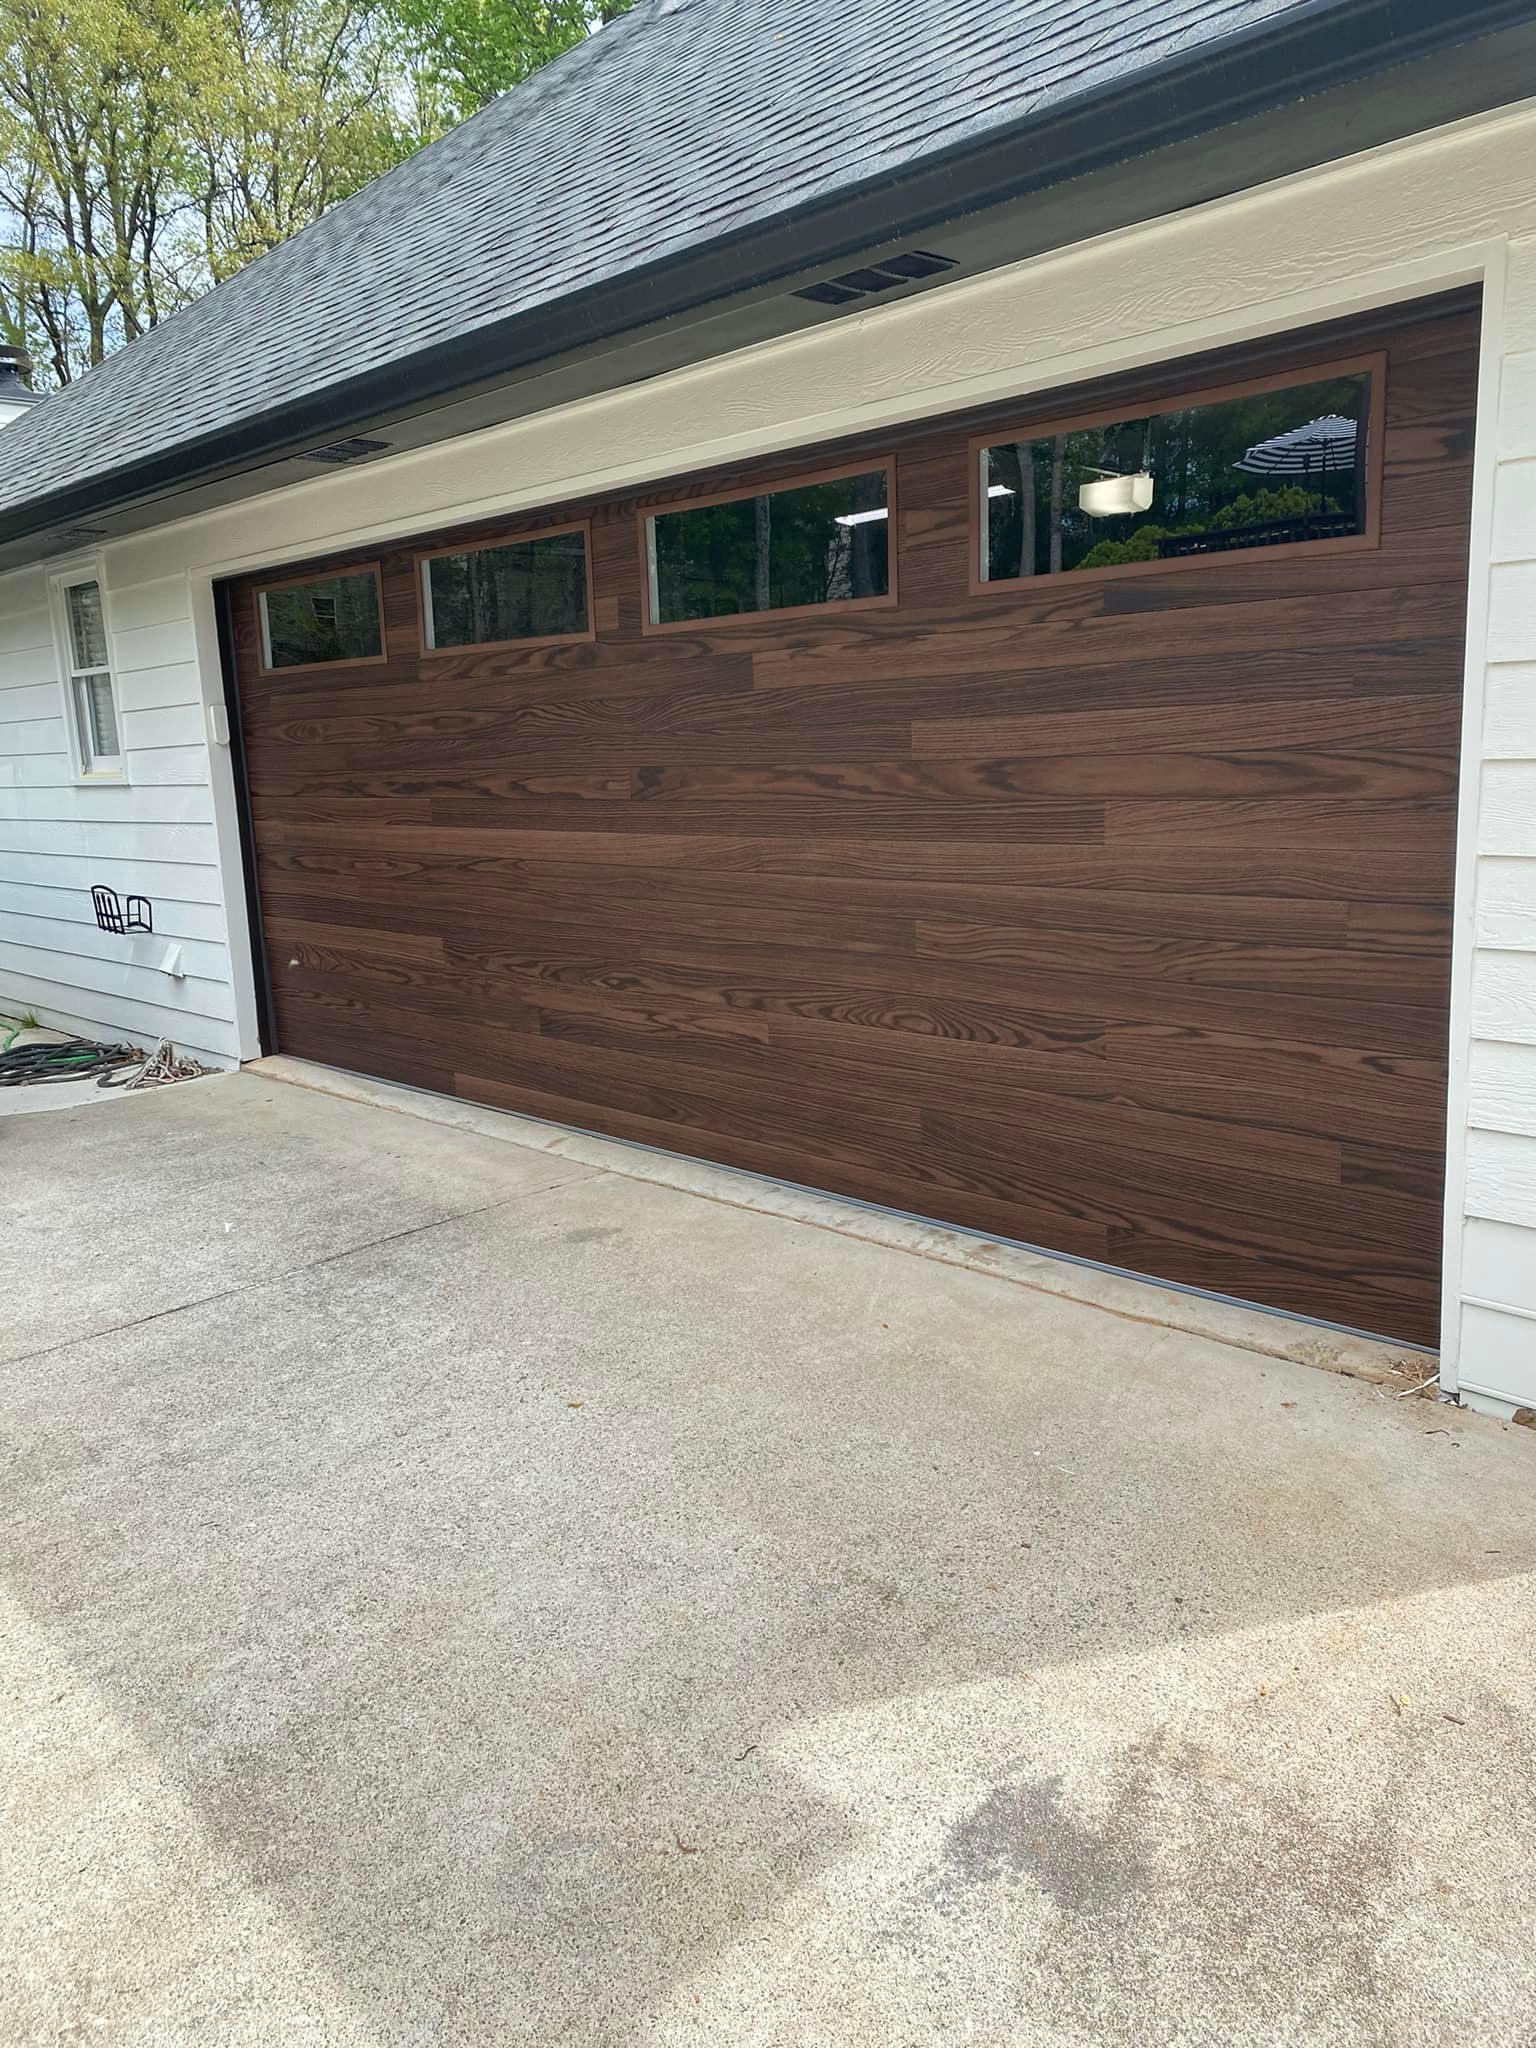 A newly installed garage door in Lawrenceville Ga